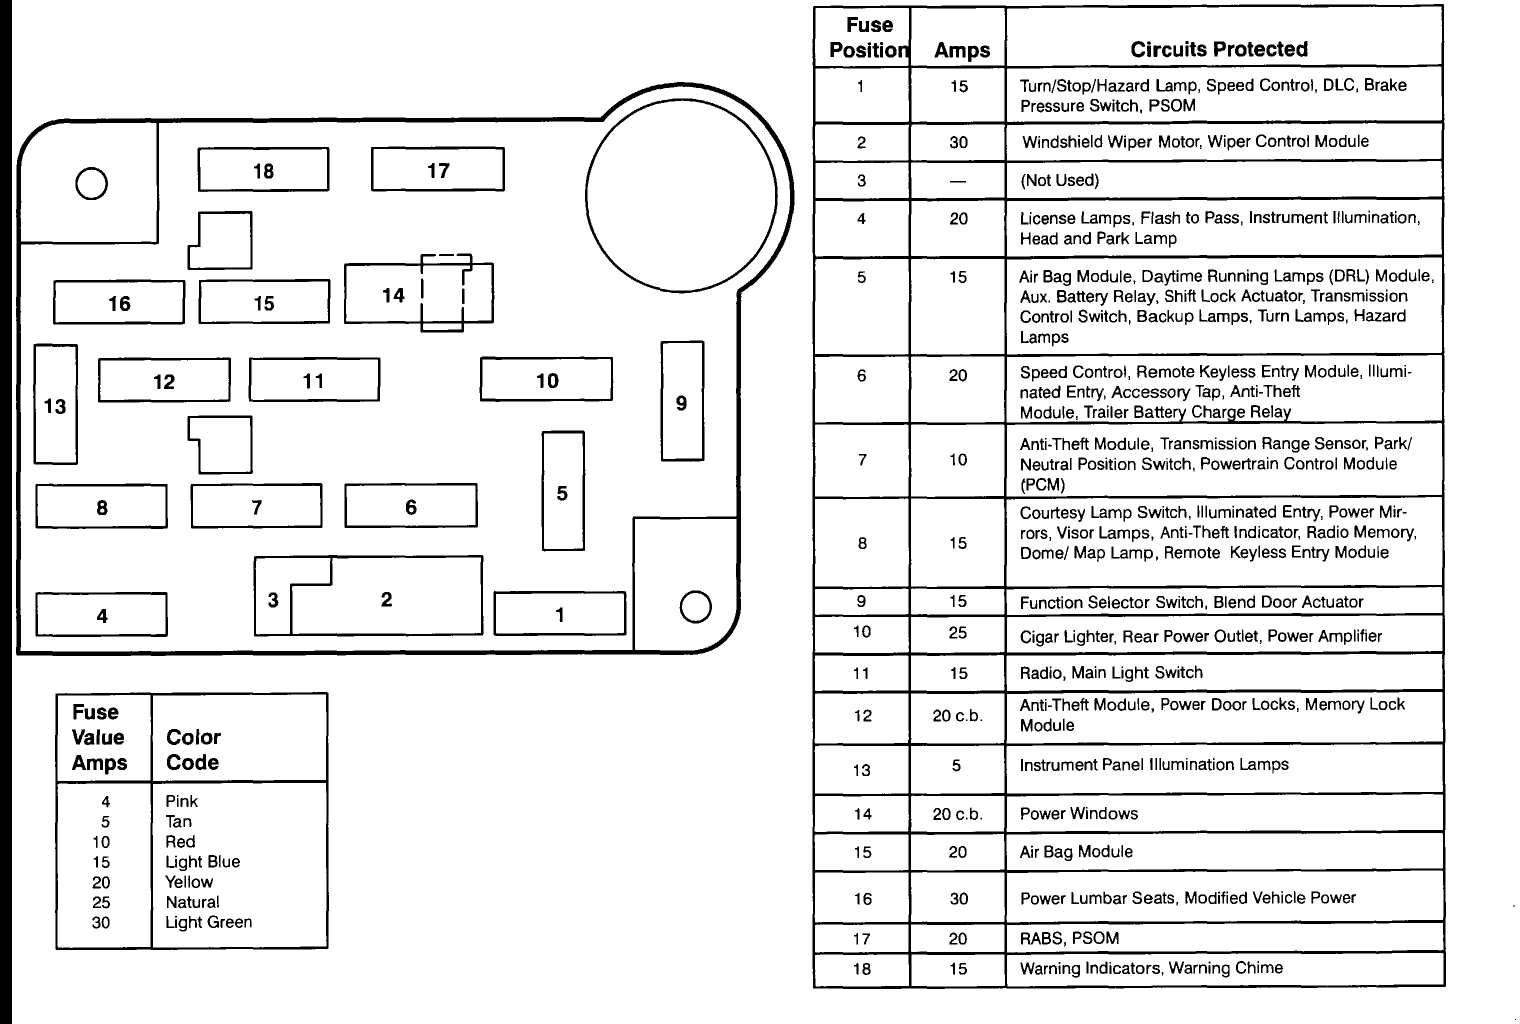 1999 F150 Under Hood Fuse Box Diagram - My 1999 Ford F250 will not go into 4 wheel drive. I 1999 Ford F250 Cruise Control Fuse Location